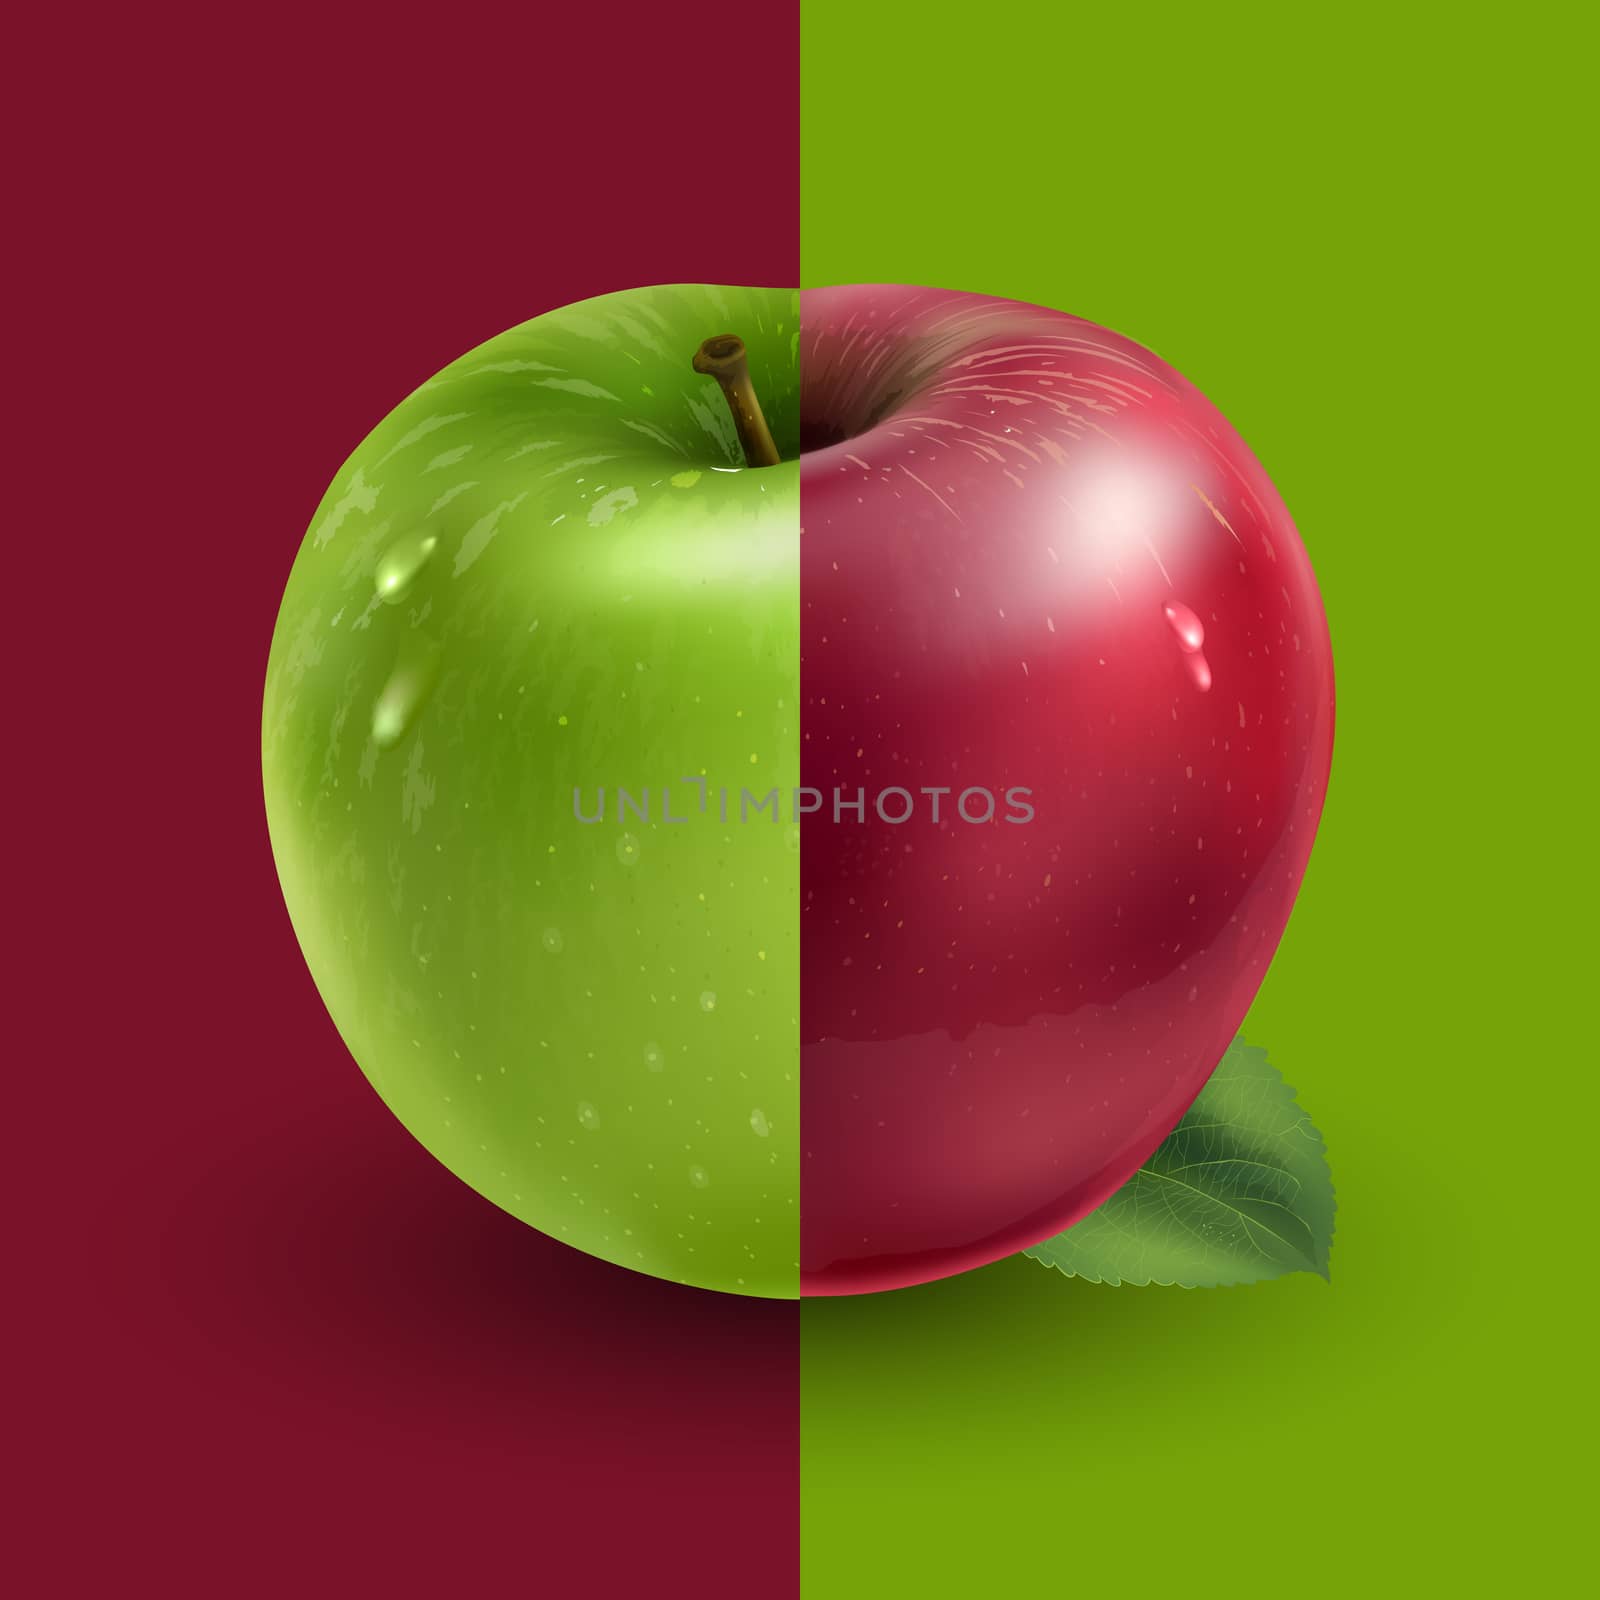 Green and red apples by ConceptCafe